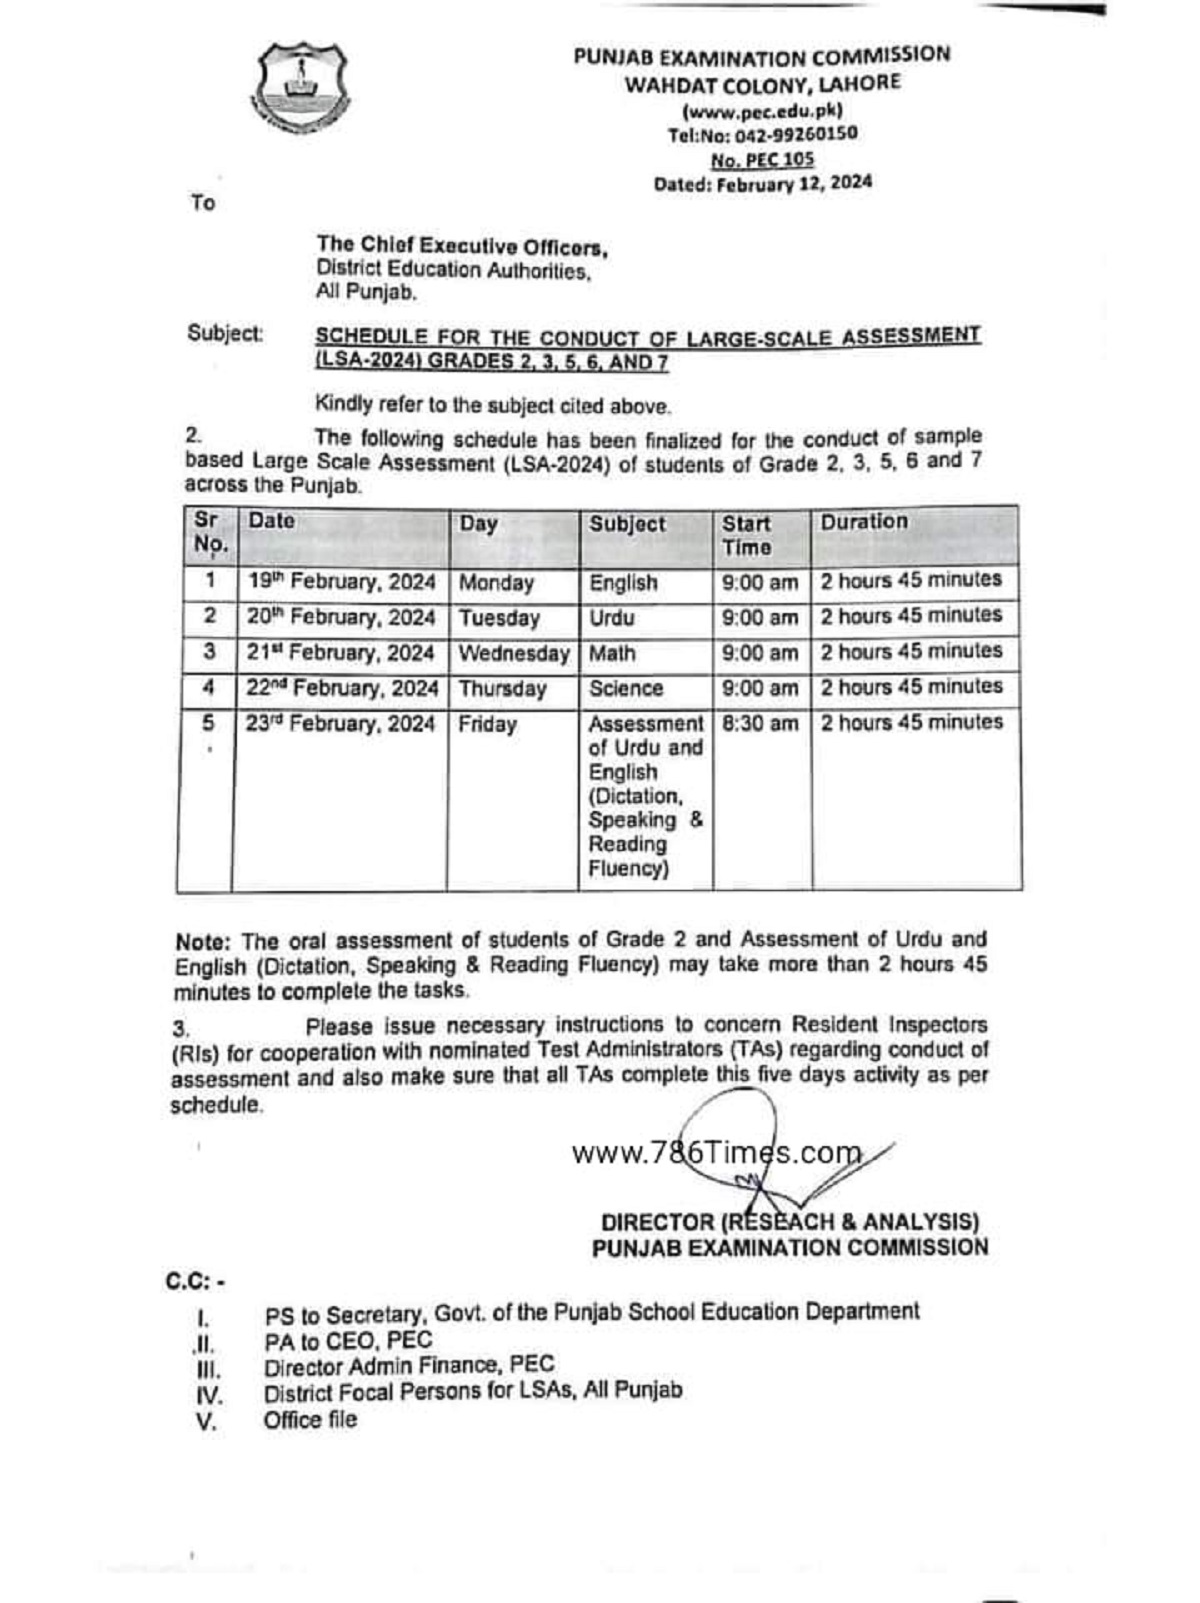 Datesheet for Large Scale Assessment LSA 24 exams in Schools